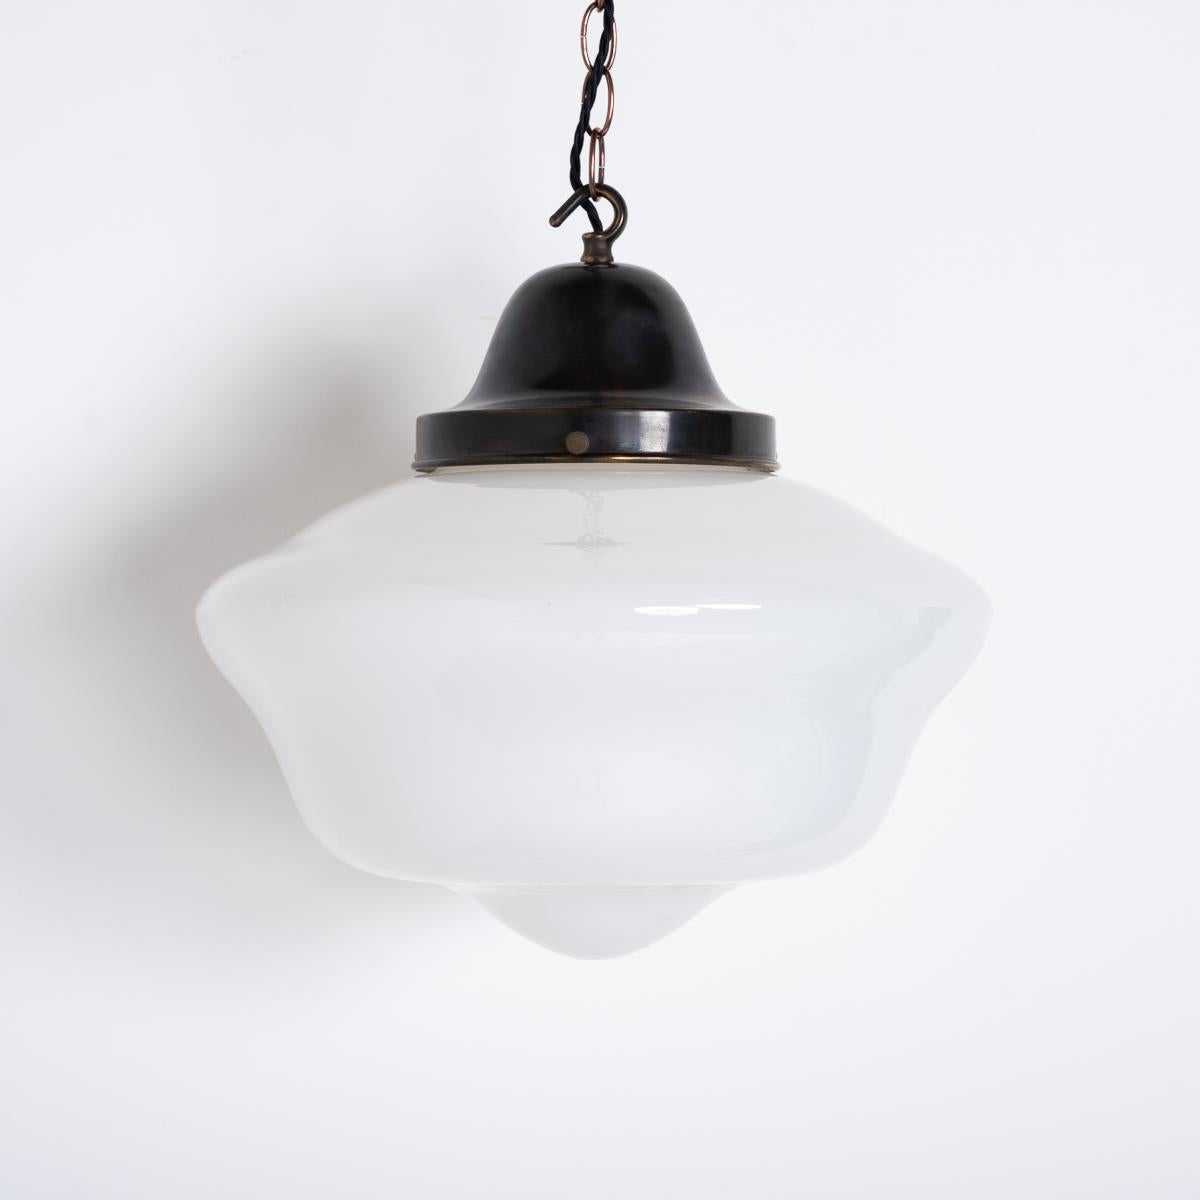 A STUNNING RUN OF LARGE SCHOOLHOUSE OPALINE PENDANTS

SOLD INDIVIDUALLY

Reclaimed from a social club in the North East of England.

Beautiful shaped opaline glass with original aged brass galleries completely original and finished with beeswax for